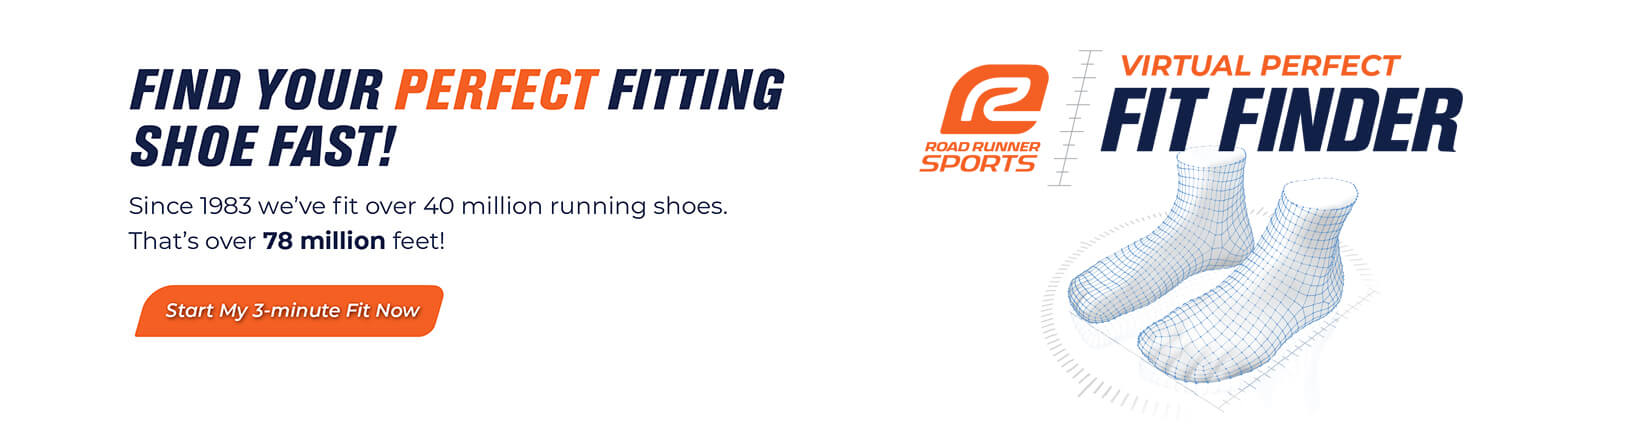 Perfect Fit Finder: Running Shoes Guide, Shoes Finder, Picking Running  Shoes at Road Runner Sports